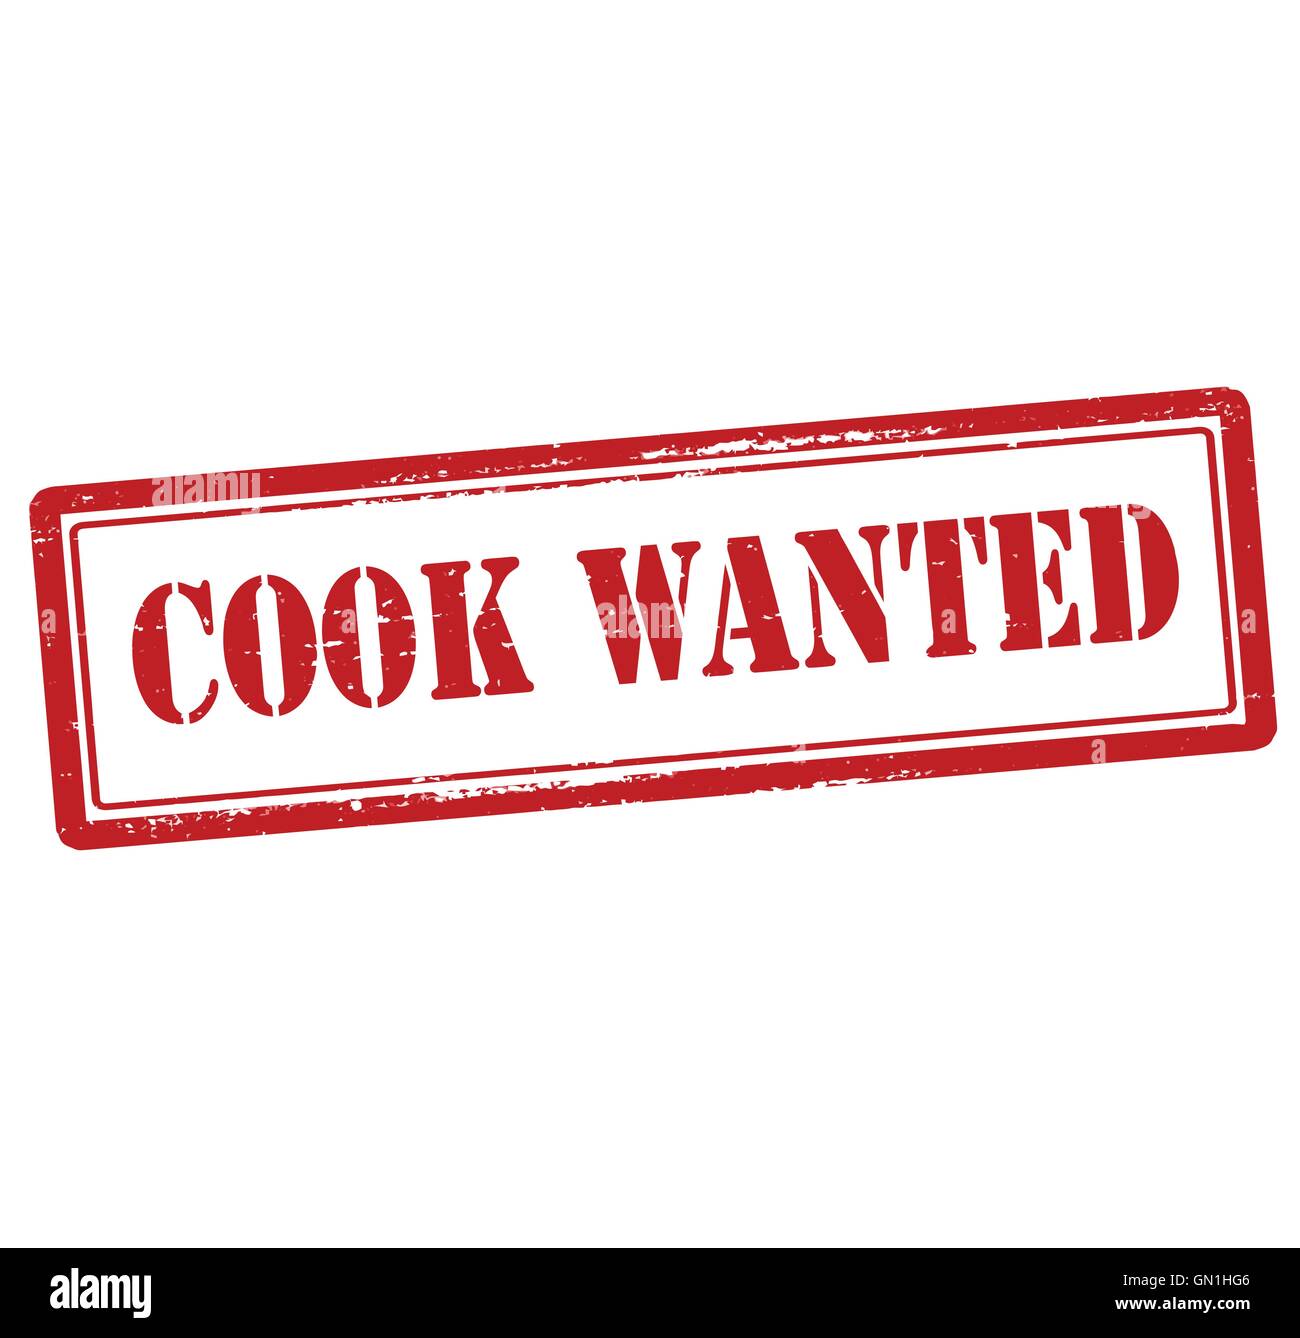 Cook wanted Stock Vector